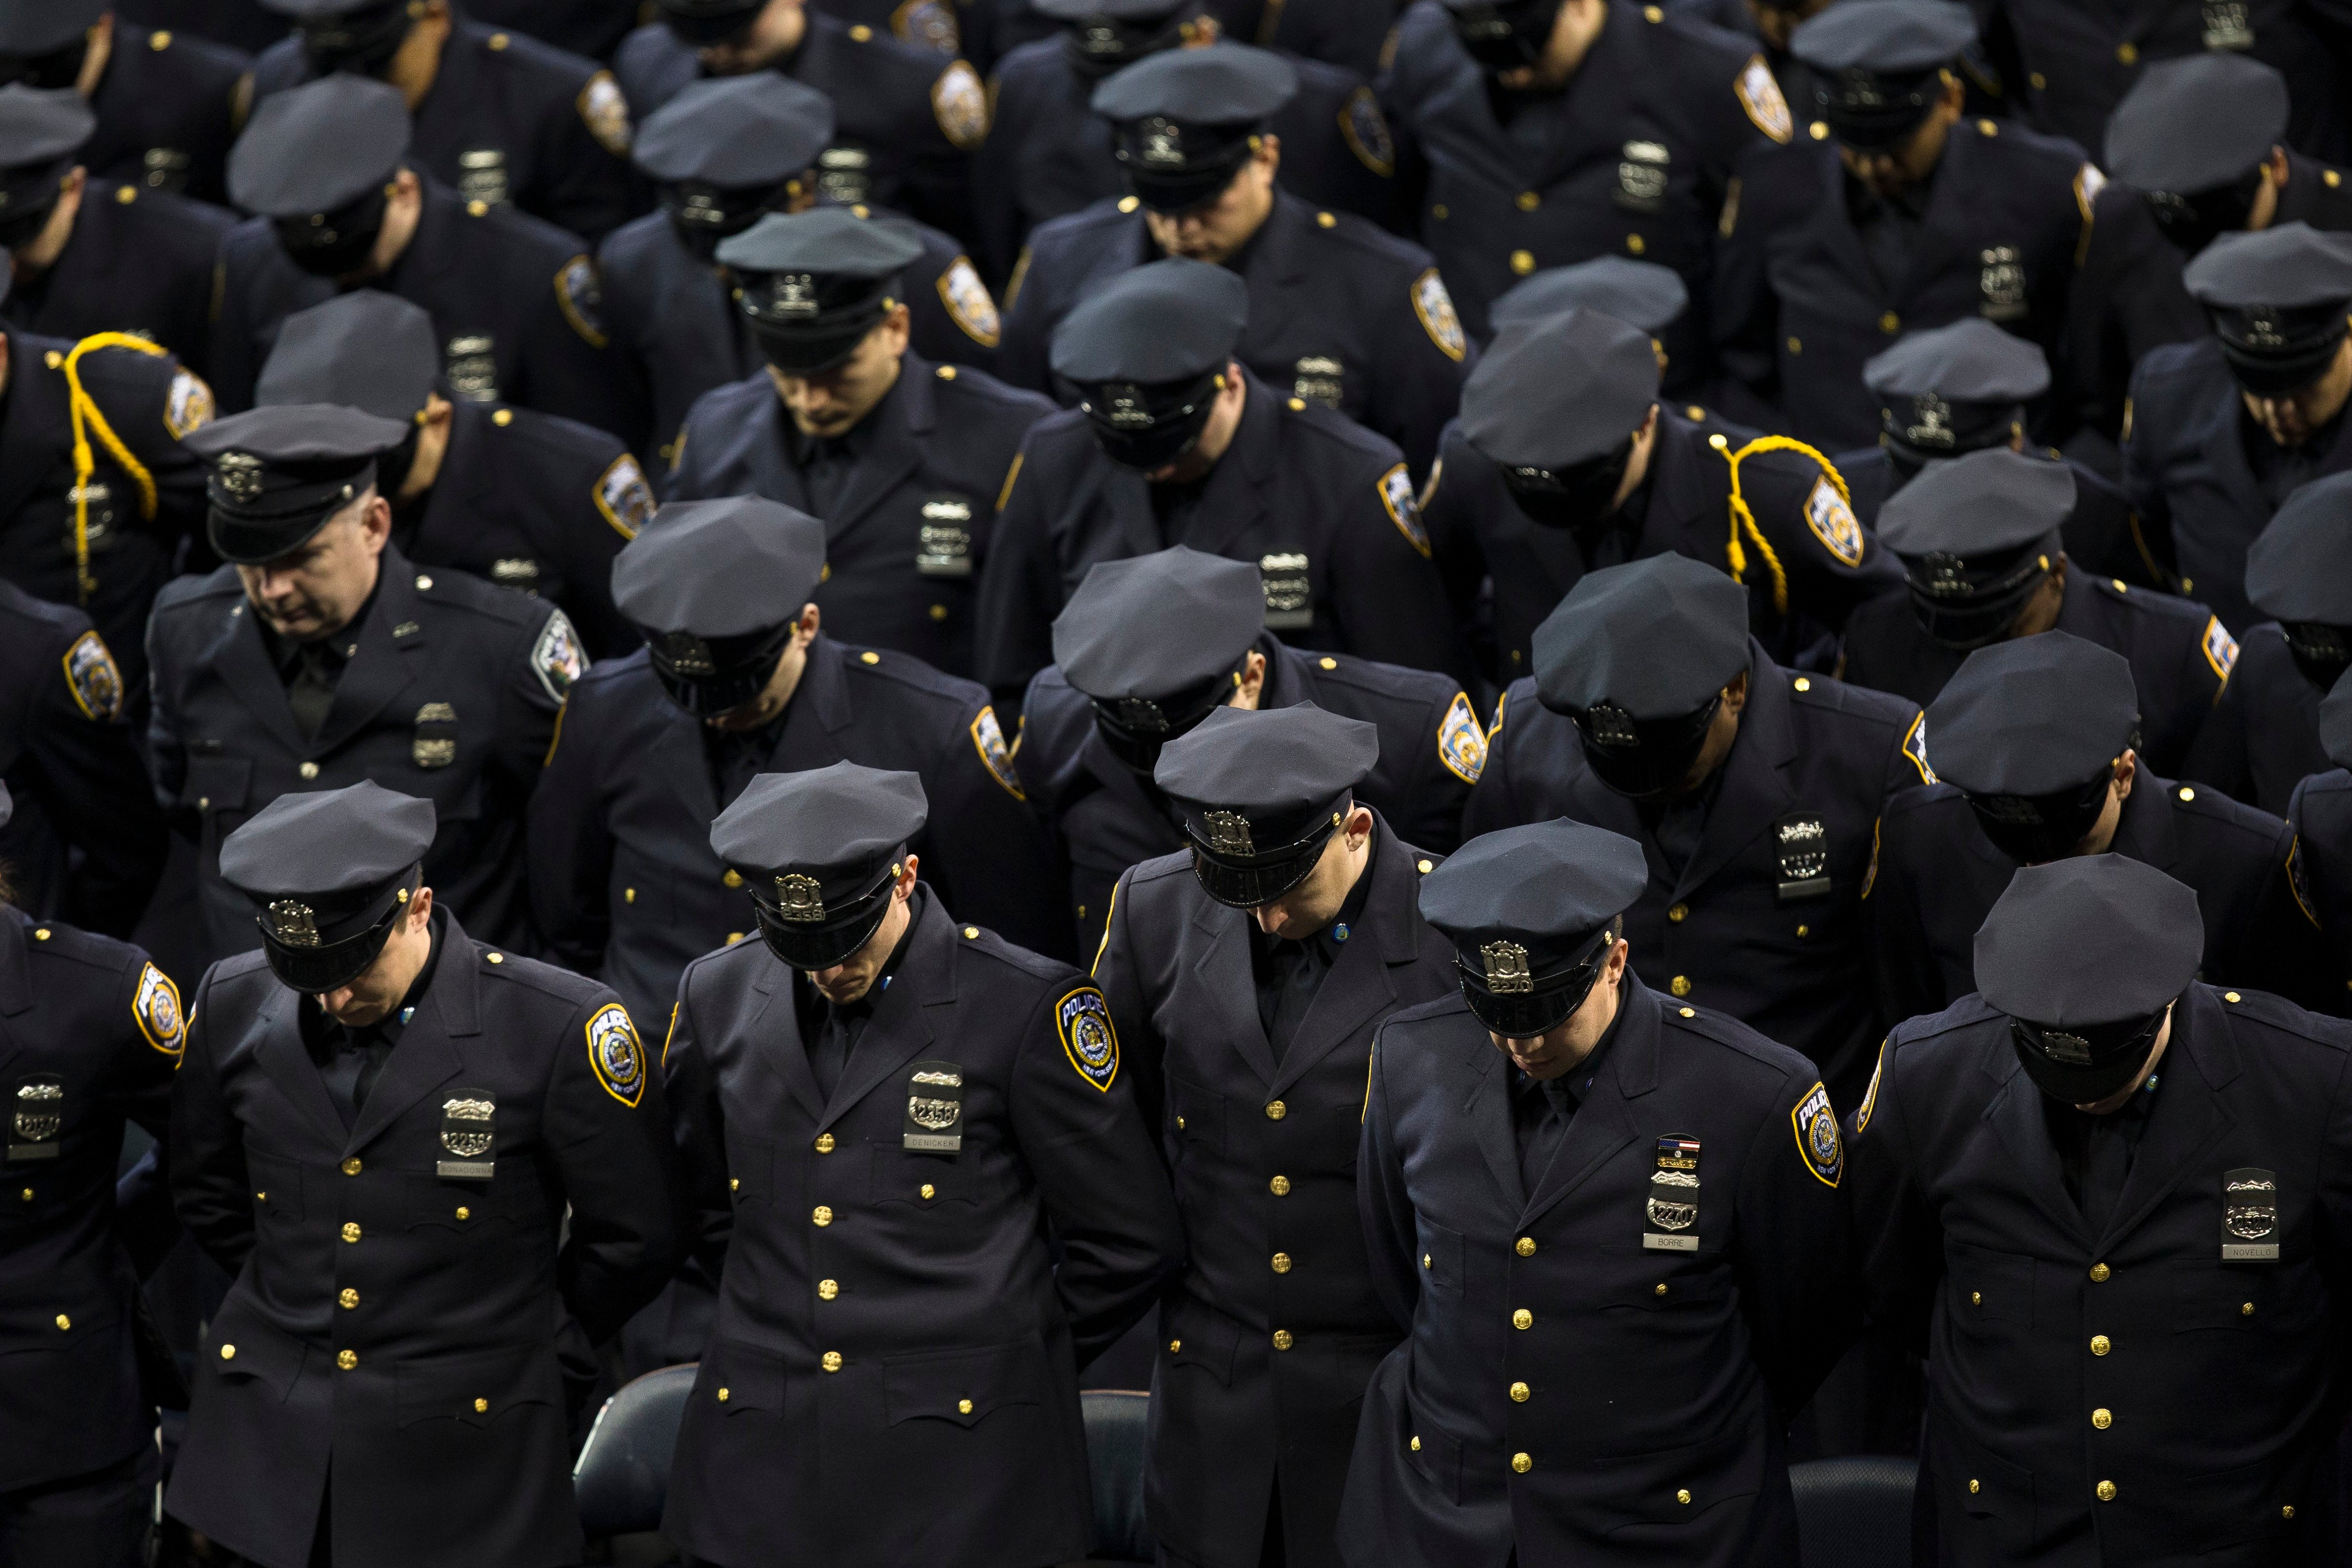 New recruits bow their heads for a moment of silence during a New York Police Academy graduation ceremony at Madison Square Garden in New York City on Dec. 29, 2014. (John Minchillo—AP)